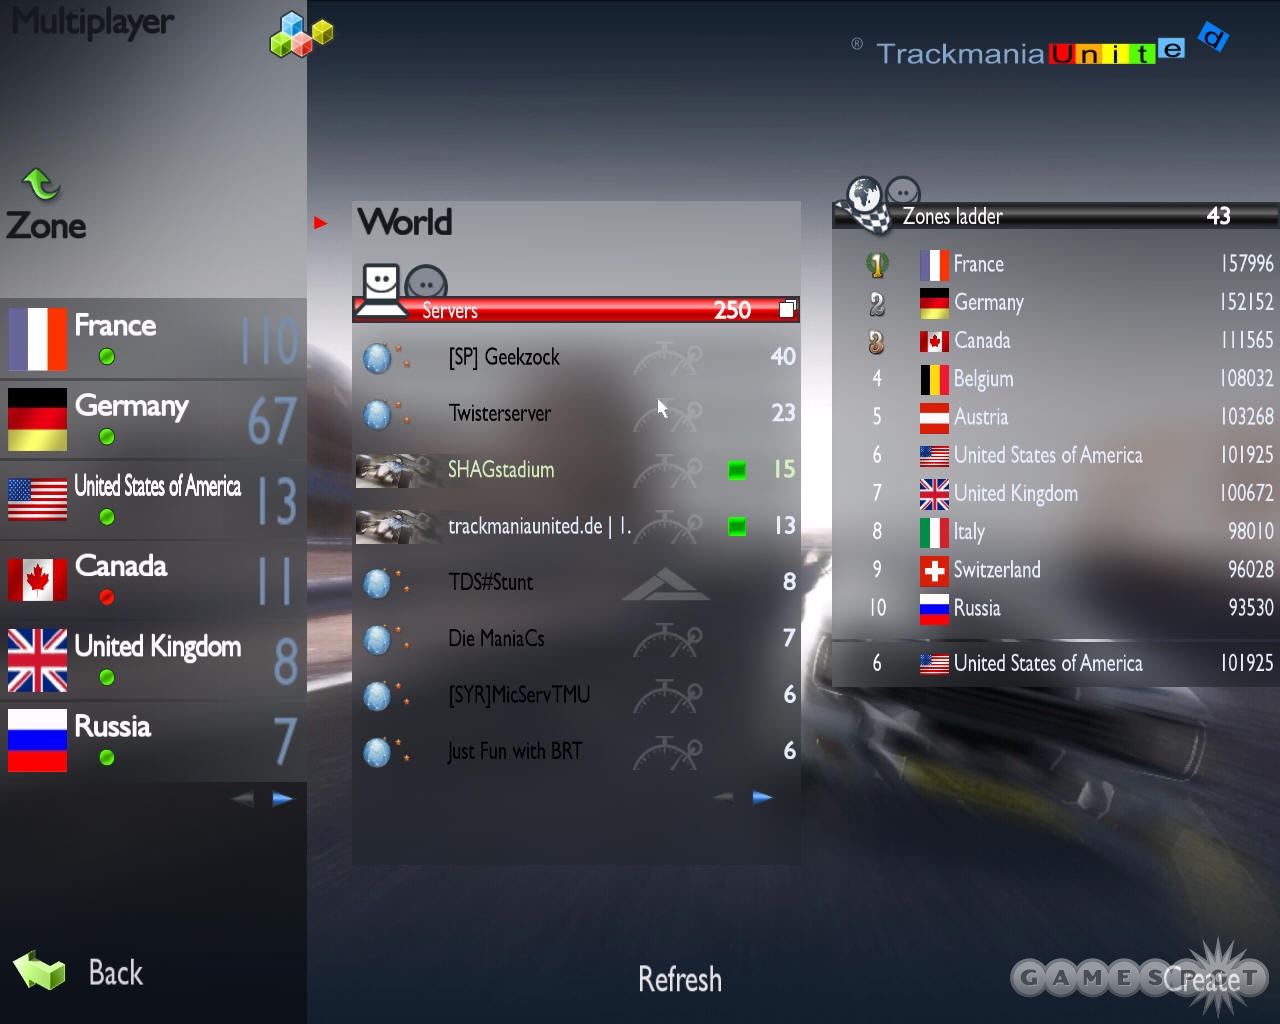 The new ManiaLink system integrates the far-flung TrackMania fan base nicely.